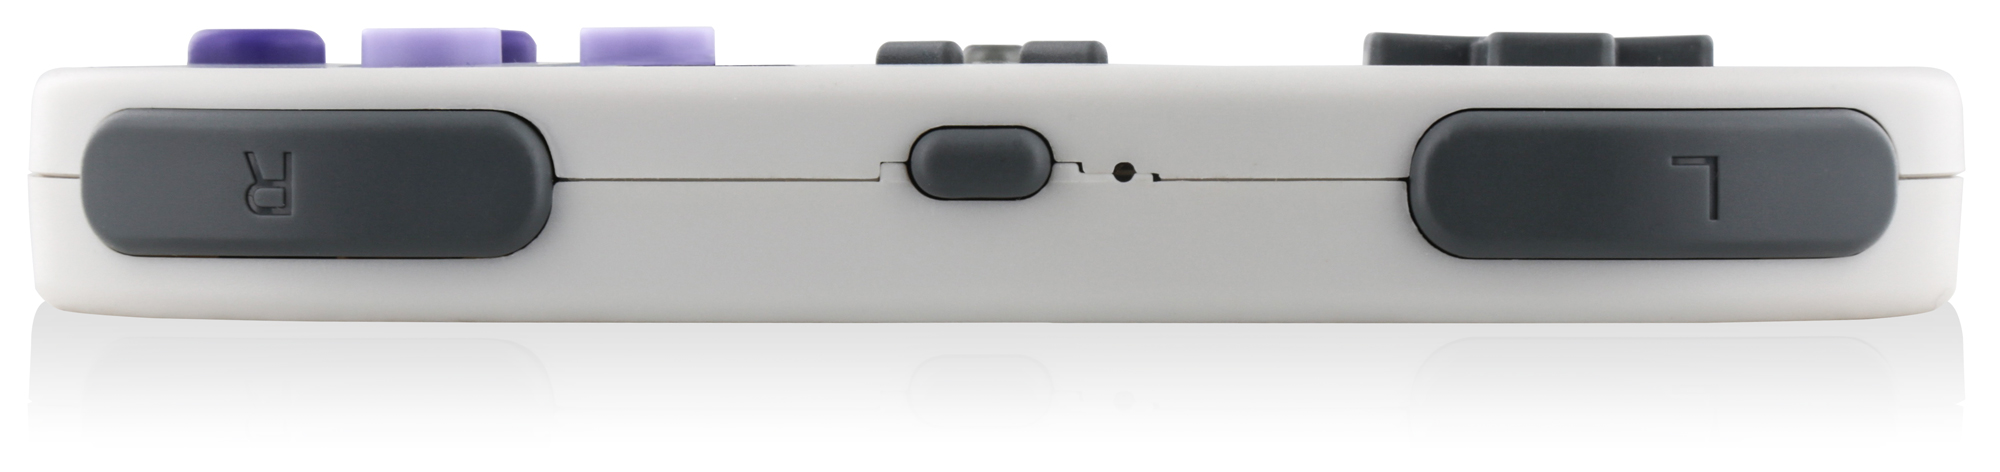 Nyko Is Mercifully Making The Wireless SNES Controller That Nintendo Refuses To